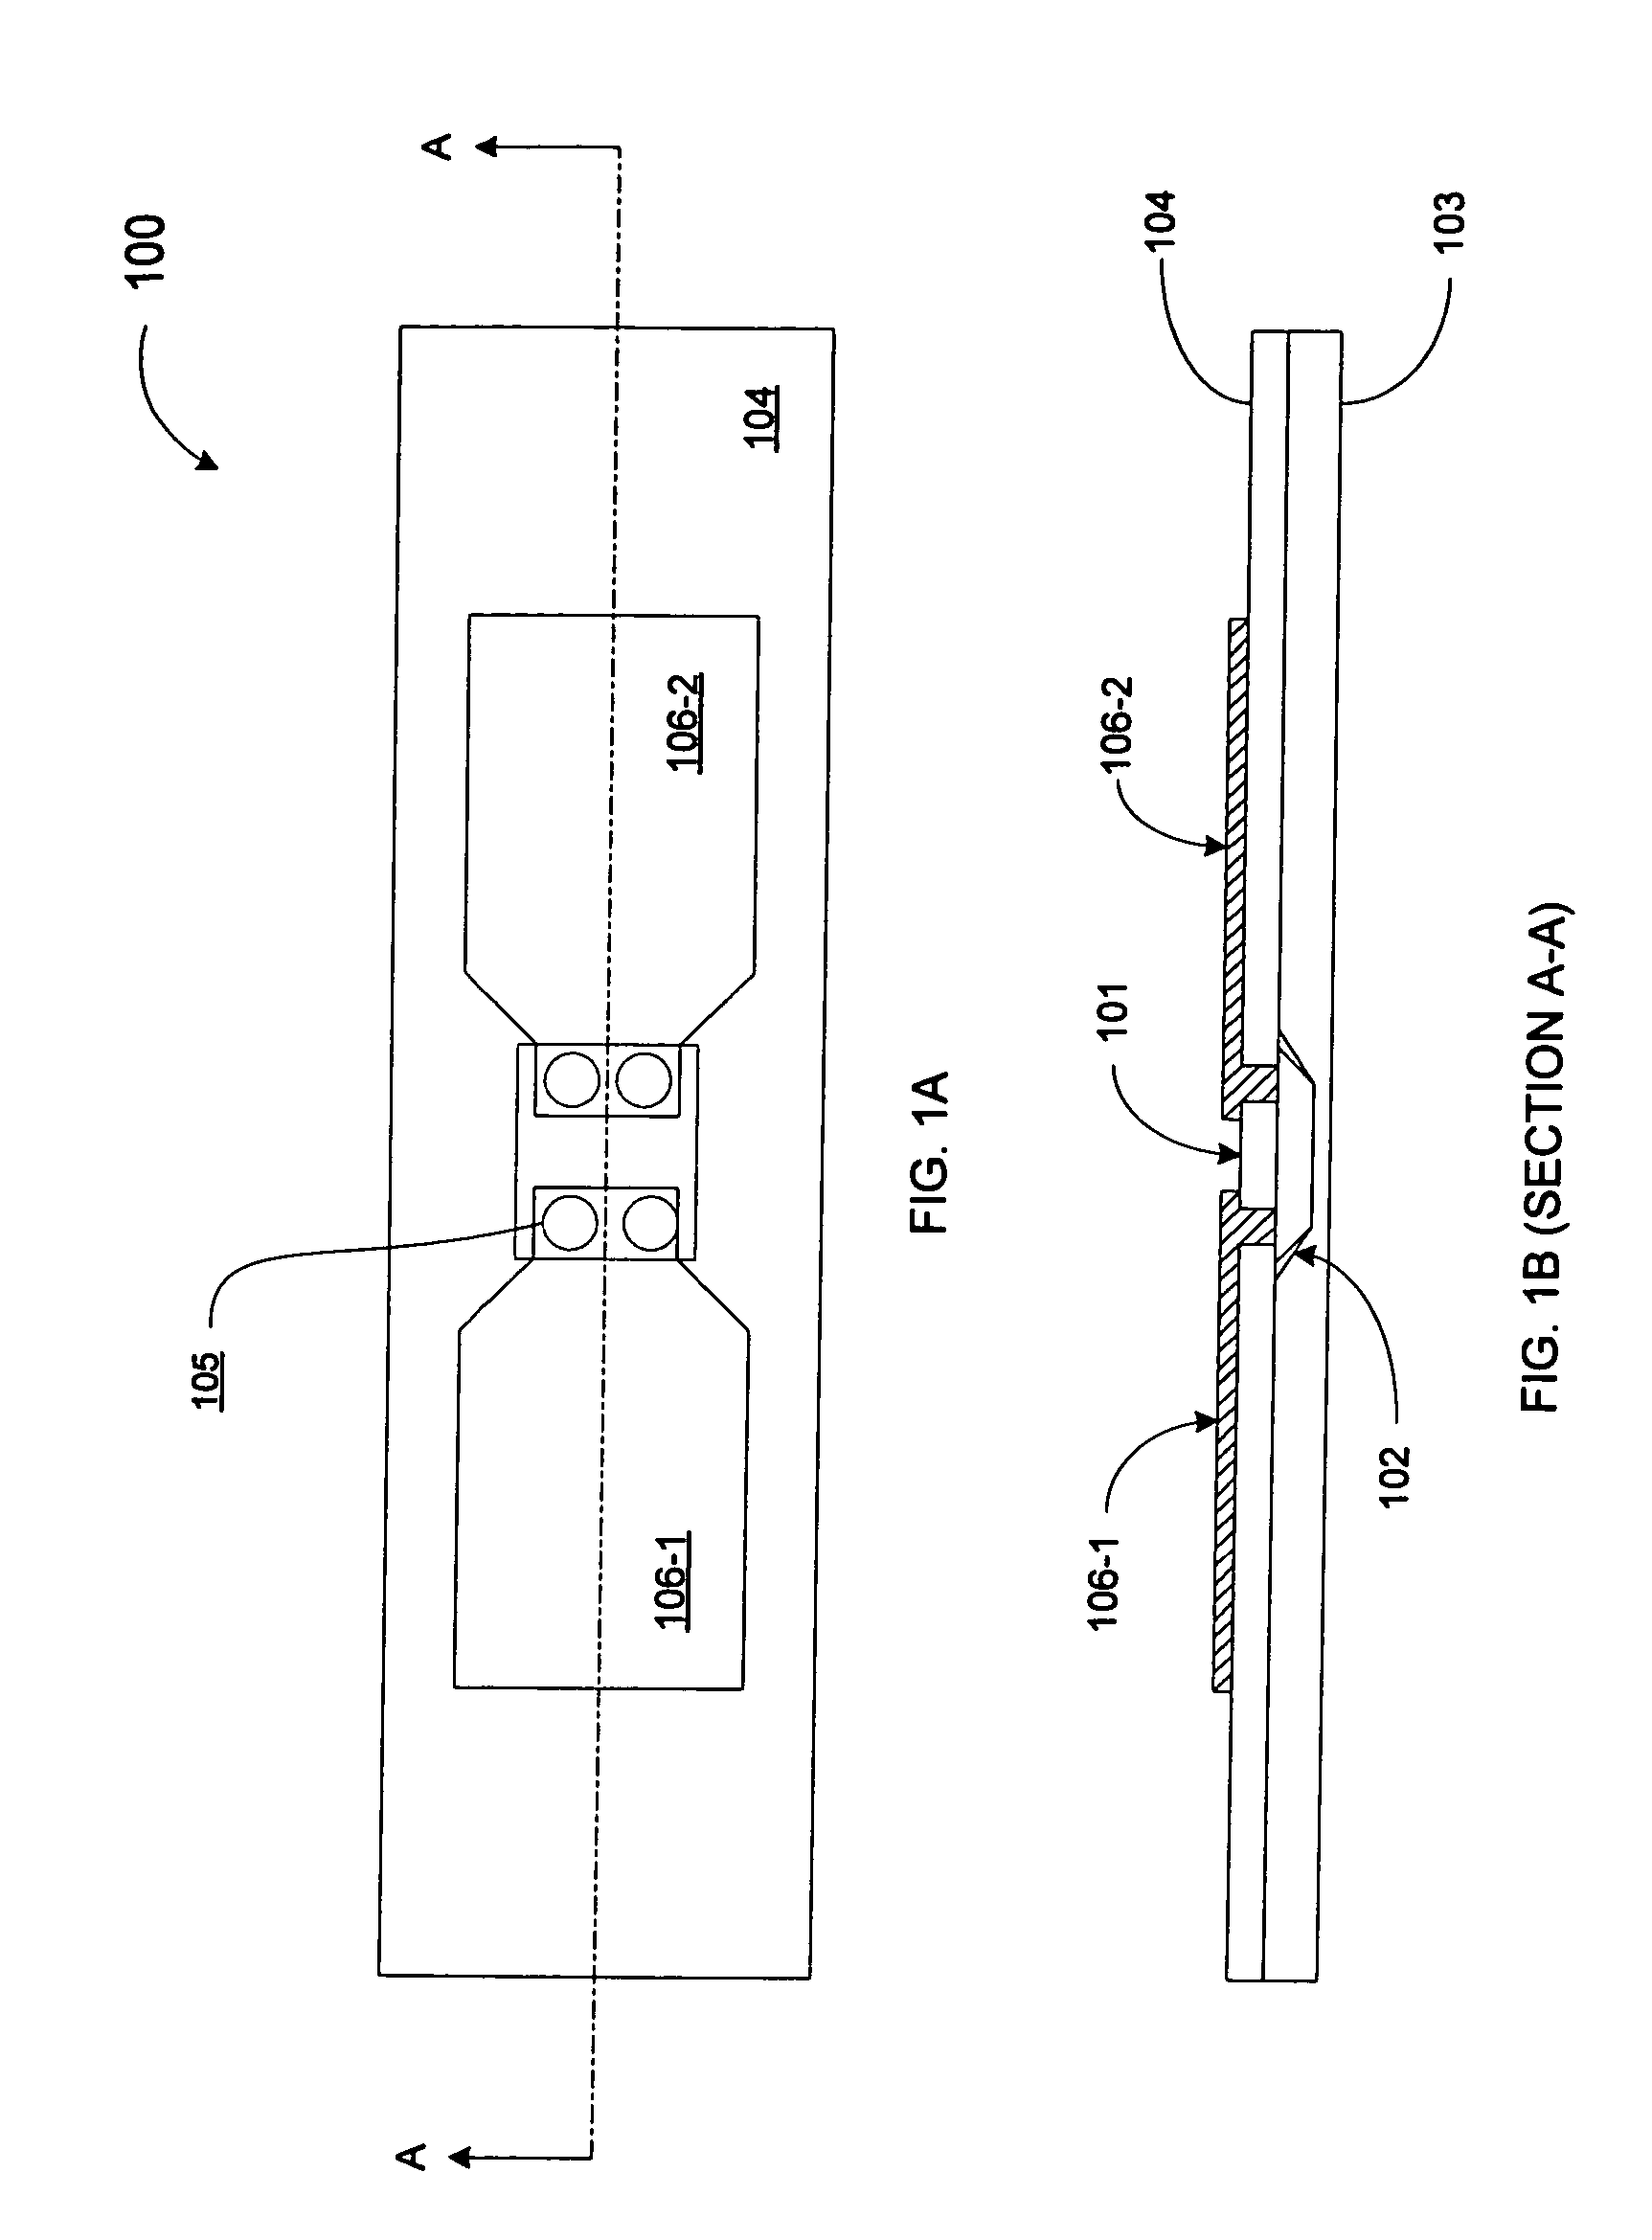 Method and apparatus for testing RFID devices